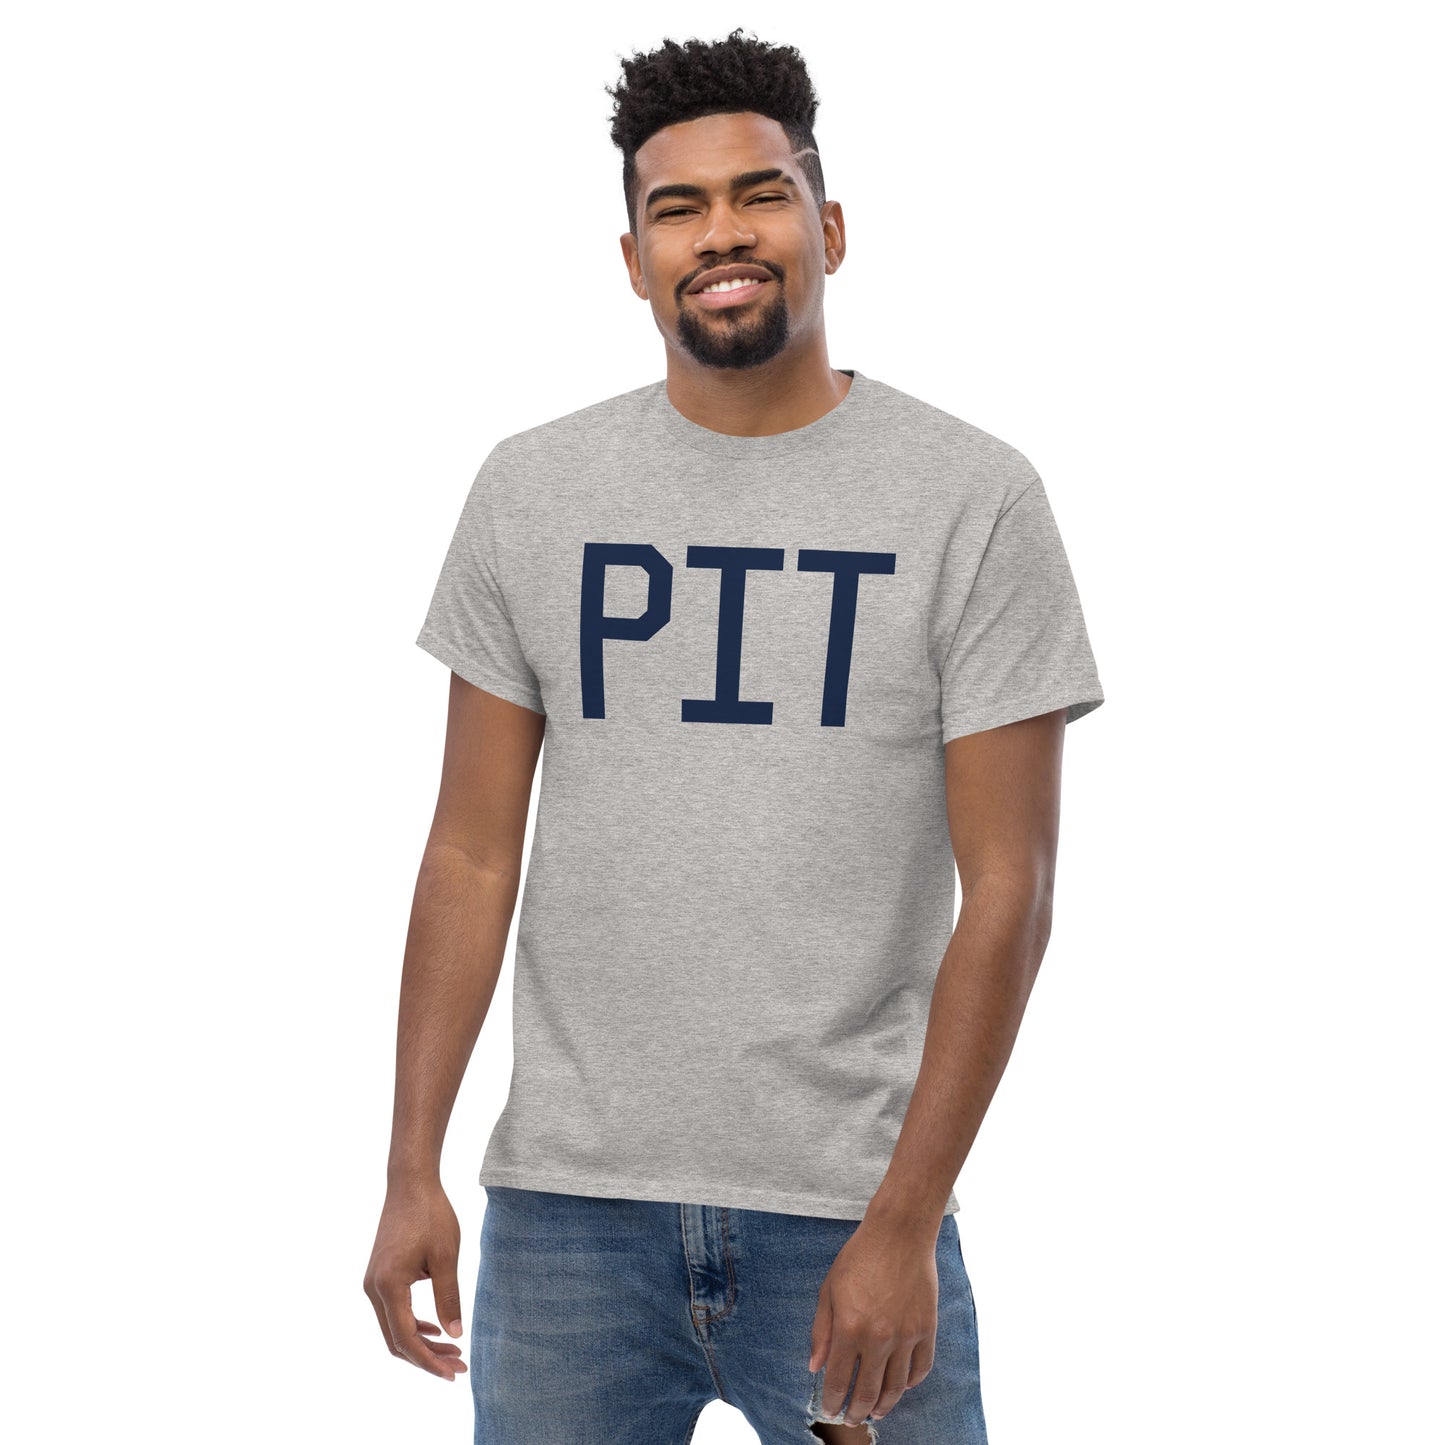 Aviation-Theme Men's T-Shirt - Navy Blue Graphic • PIT Pittsburgh • YHM Designs - Image 06